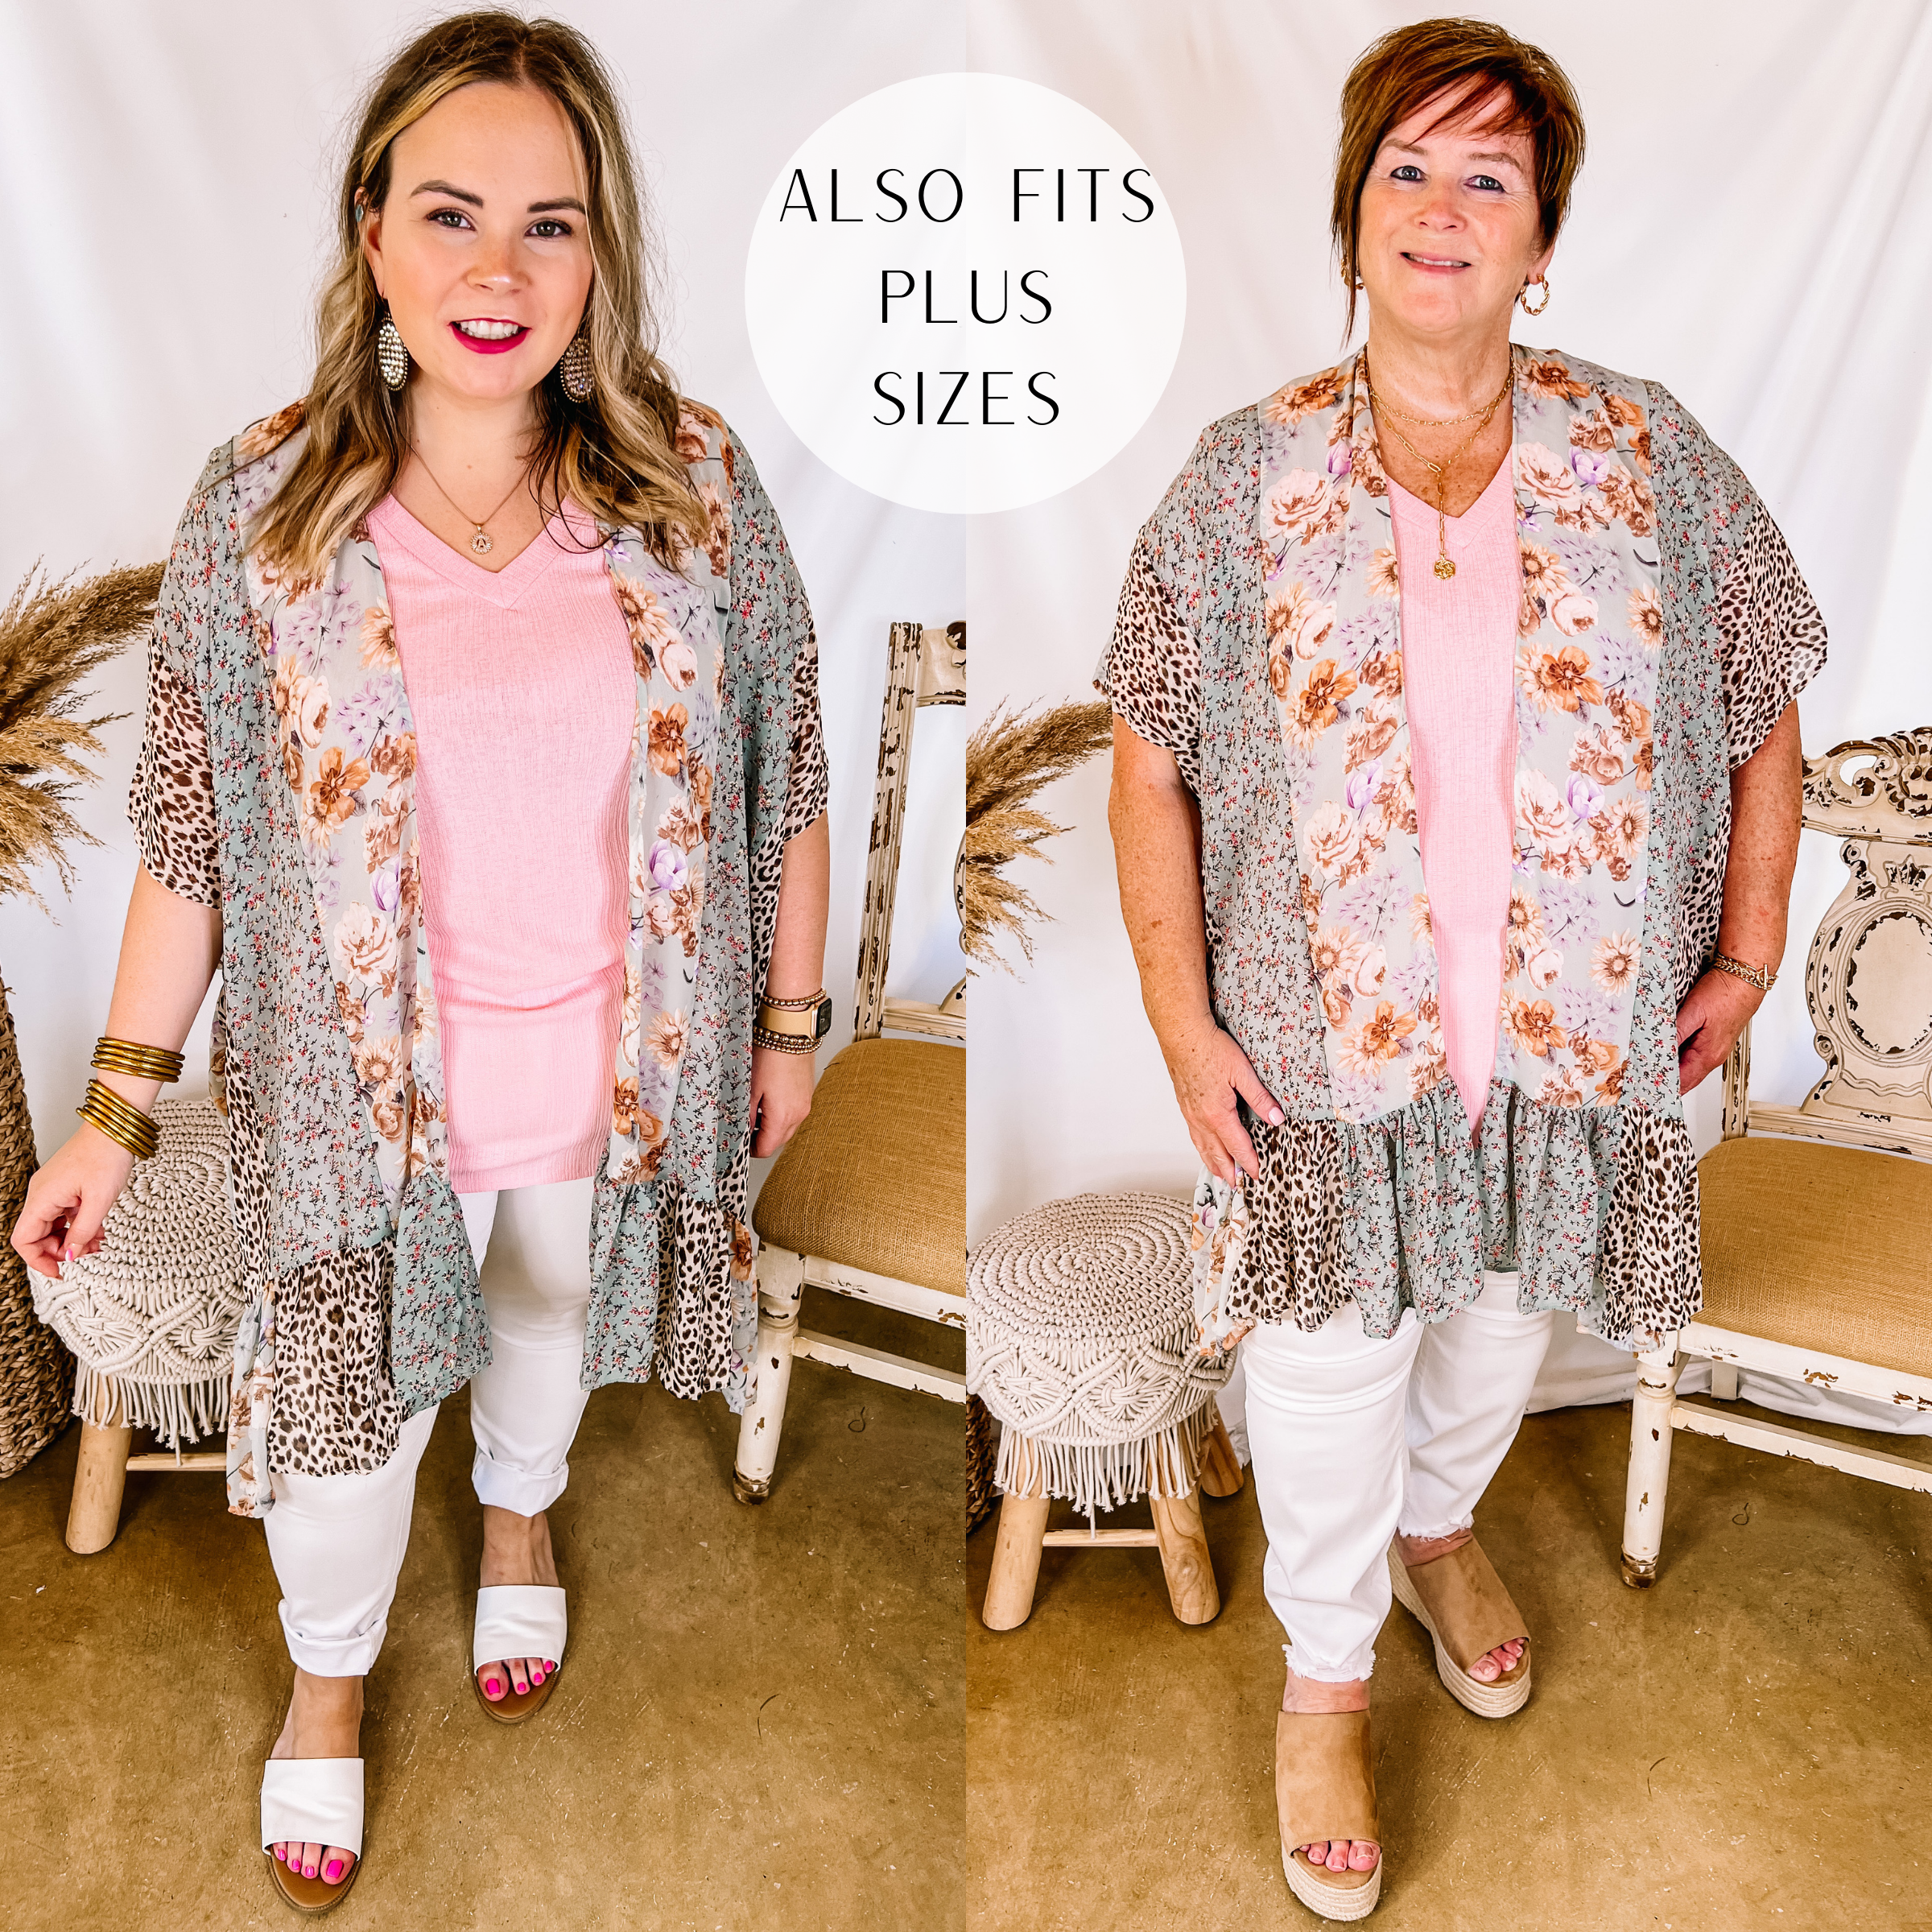 Models are wearing a dusty mint kimono that is a mix of floral and animal print. Both models have it paired with white skinny jeans, a pink top, and gold jewelry.